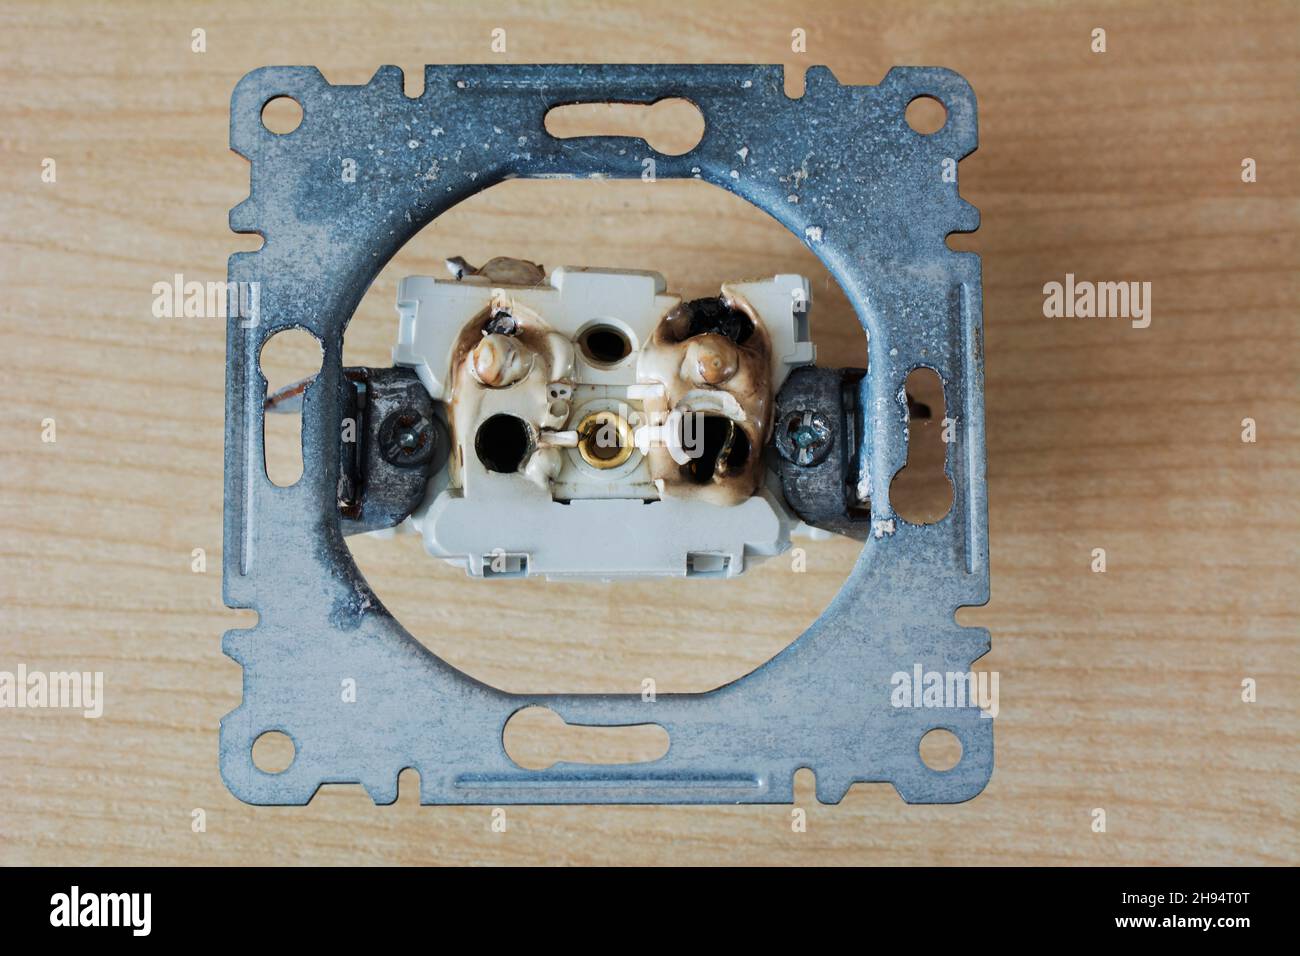 Broken power overload switch electric outlet. Electric short circuit causing fire on plug socket. Stock Photo